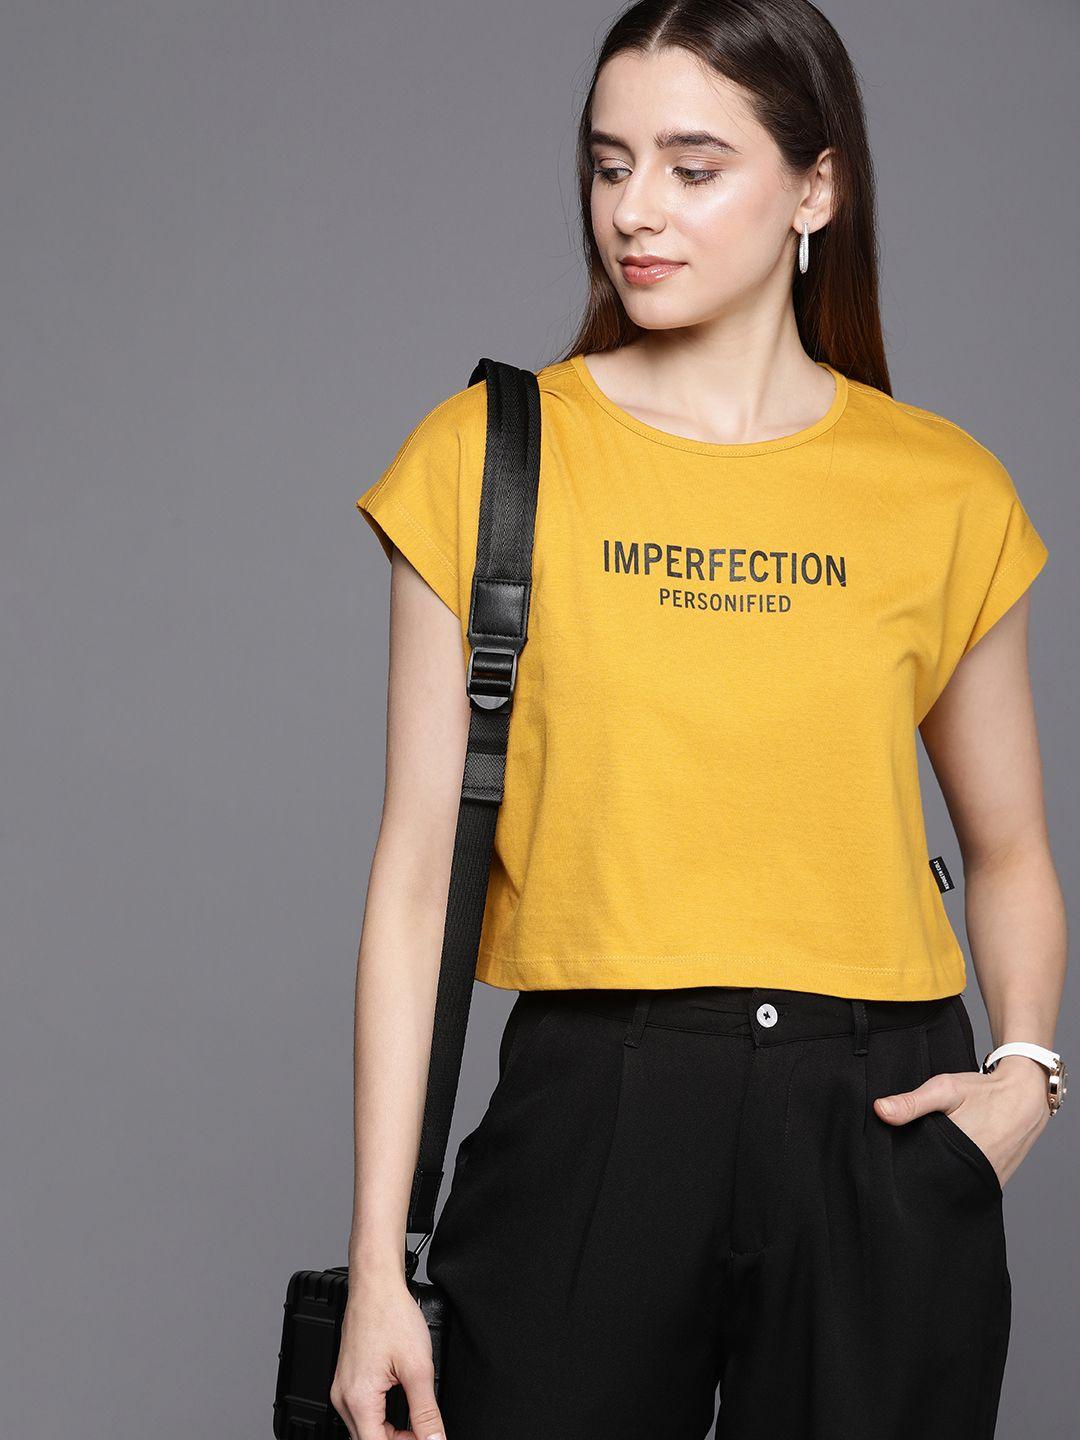 kenneth cole voice tee women yellow typography printed pure cotton t-shirt